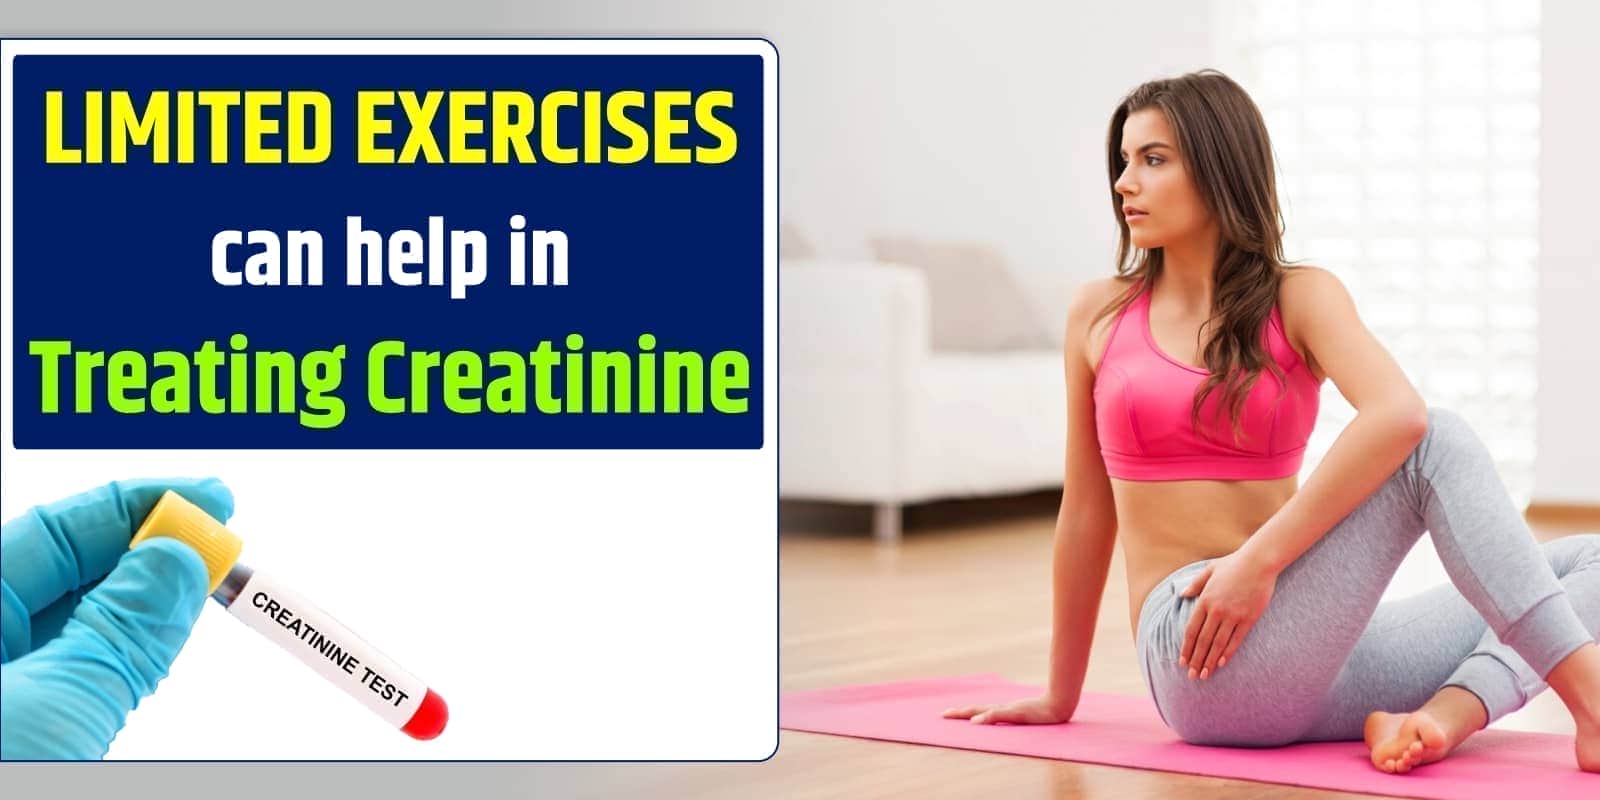 Limited Exercises can help in Treating Creatinine